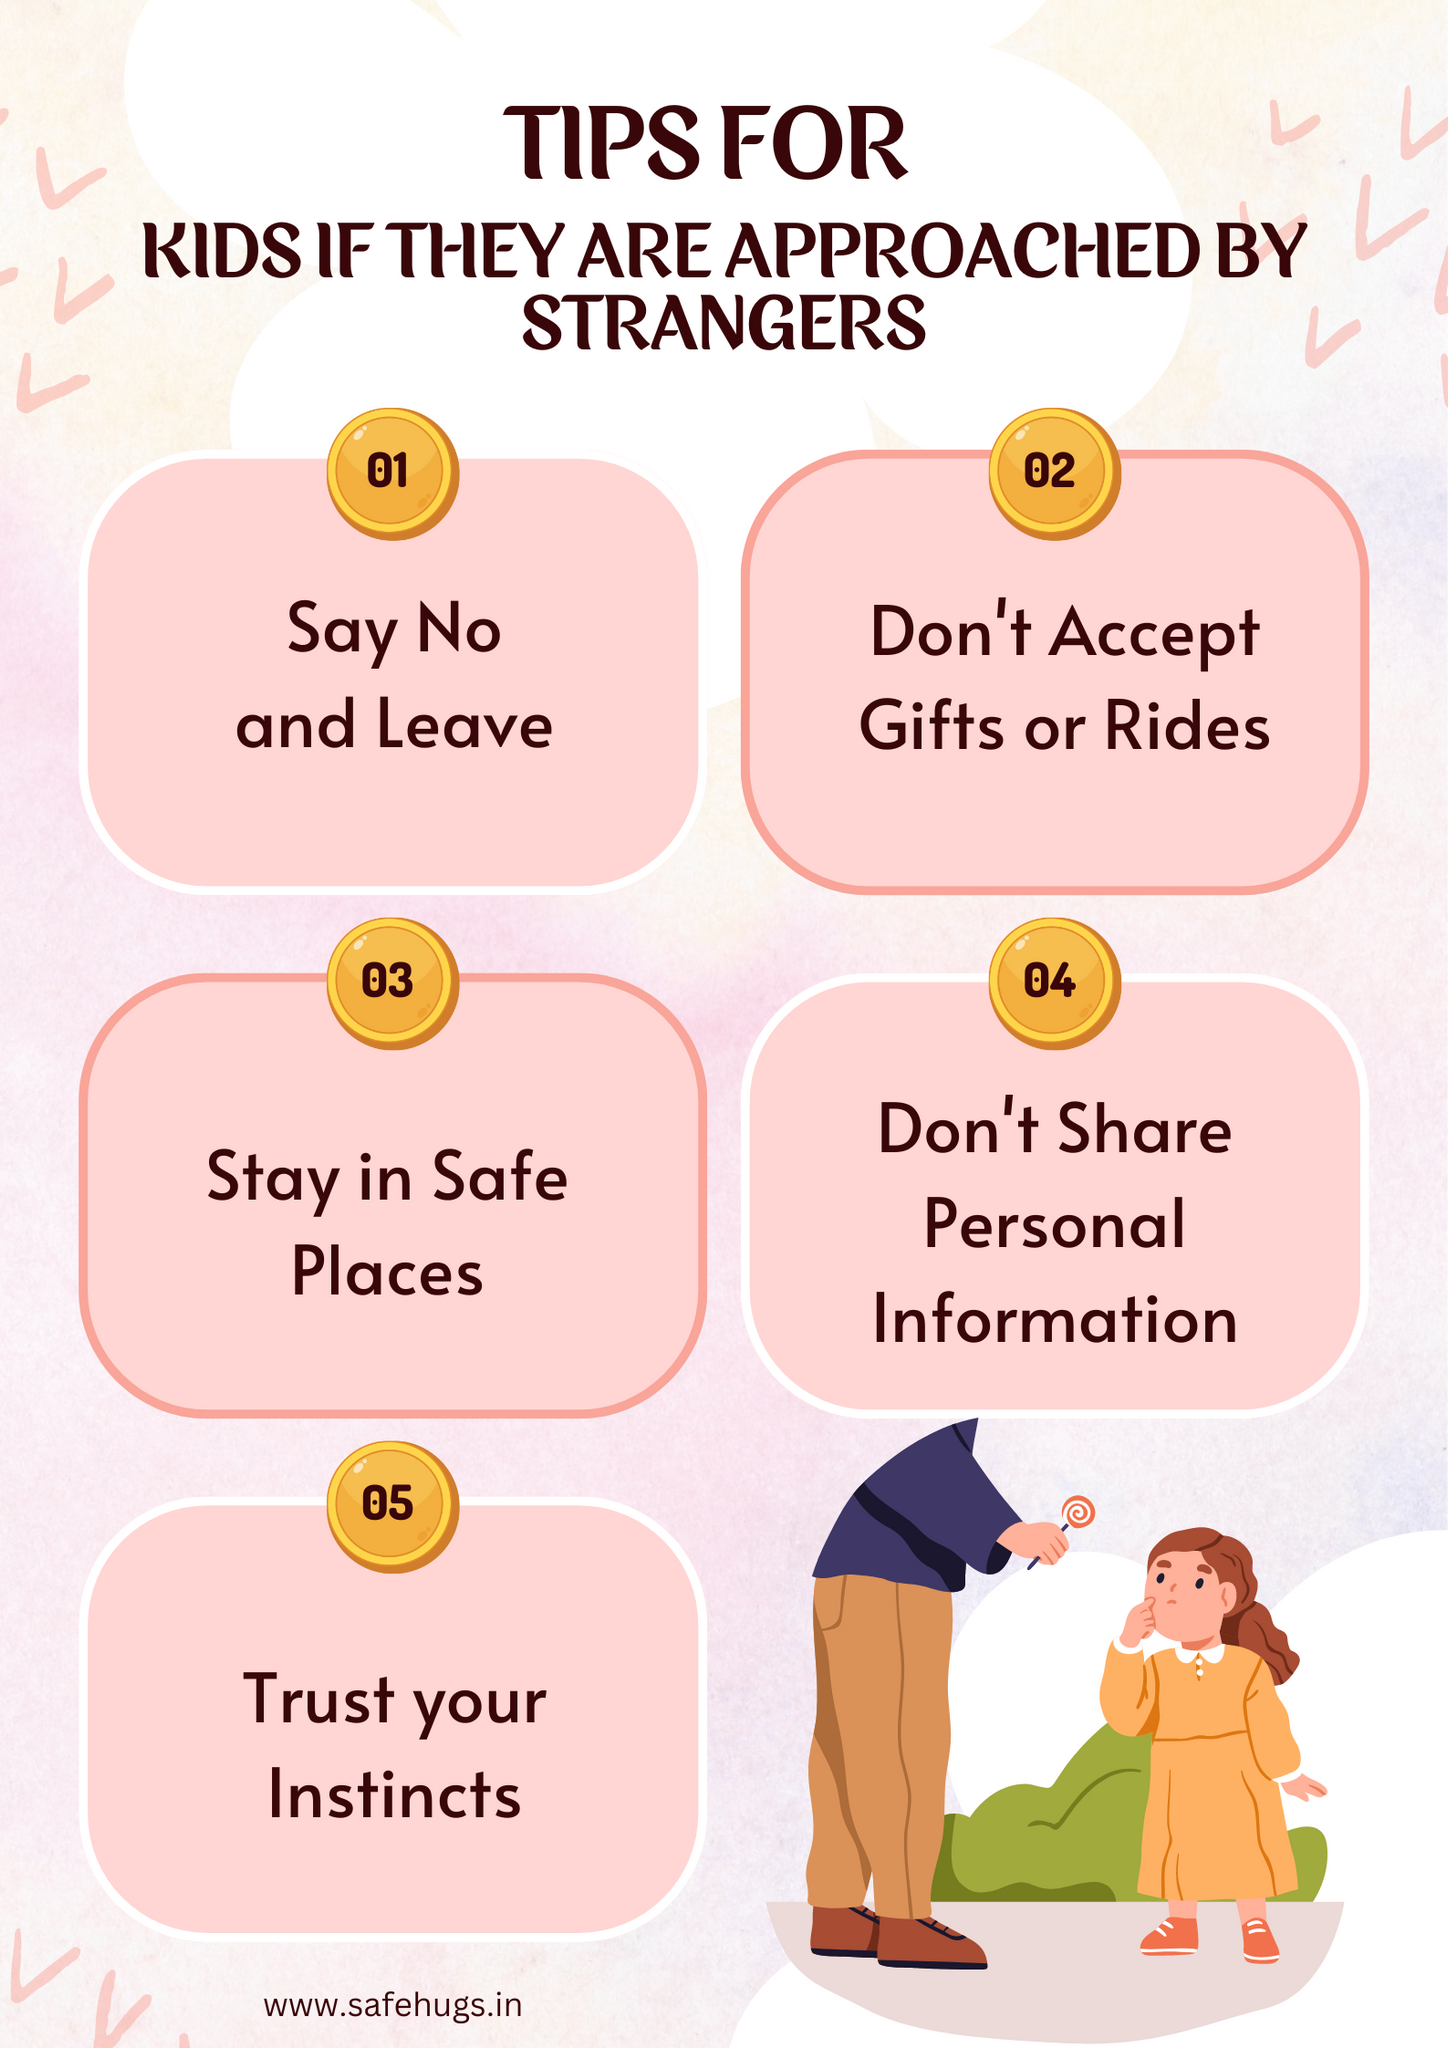 Tips for kids when they are approached by strangers.